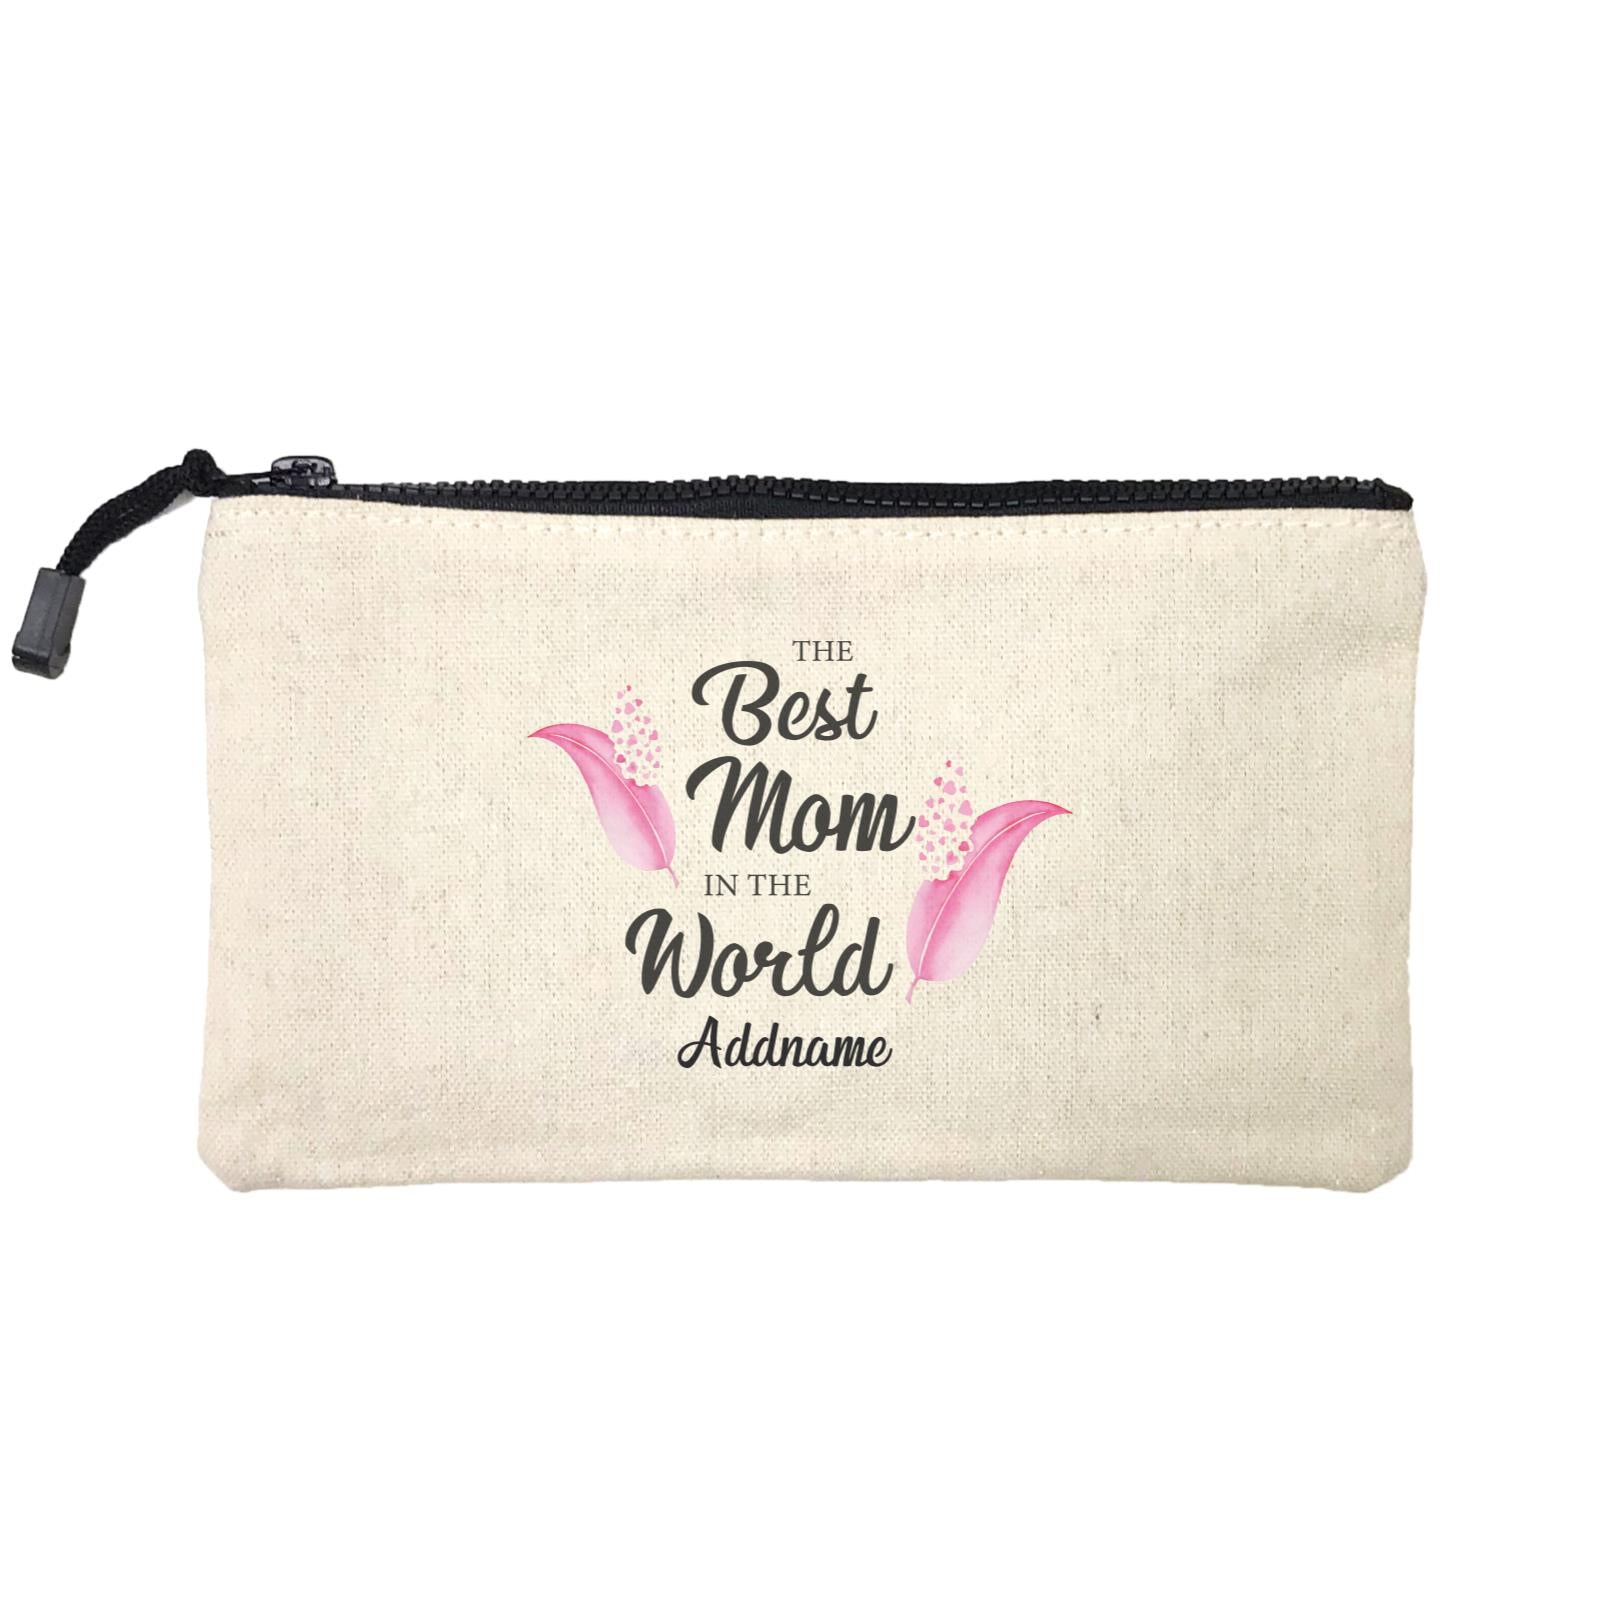 Sweet Mom Quotes 1 Love Feathers The Best Mom In The World Addname Mini Accessories Stationery Pouch